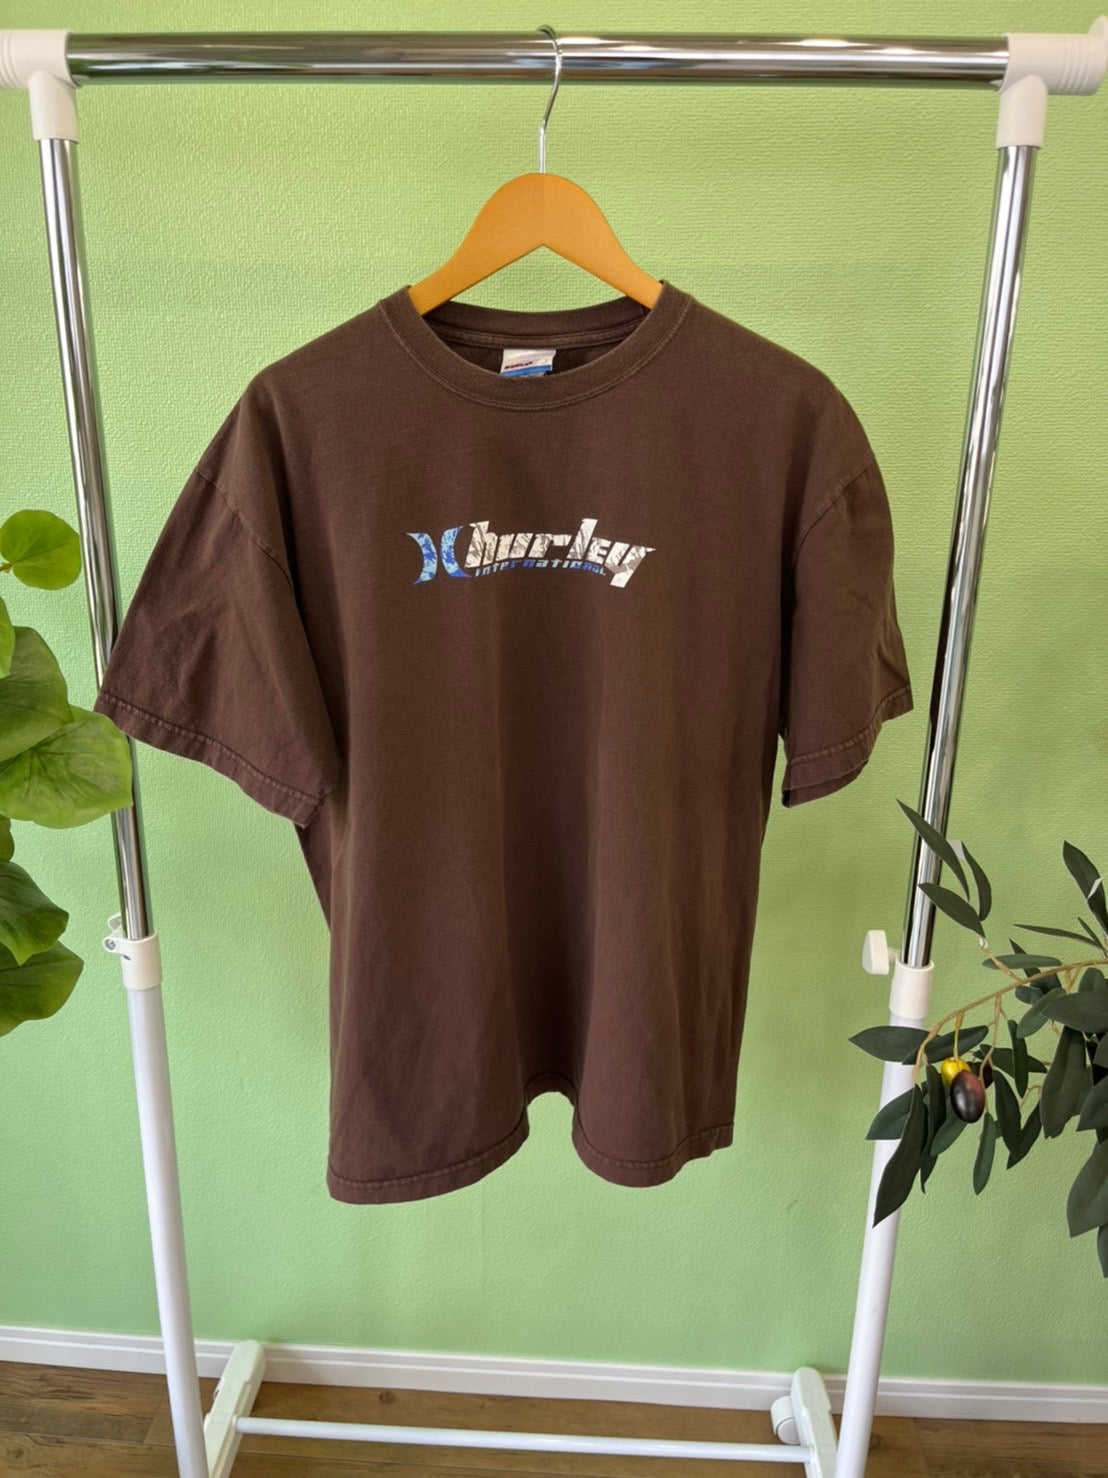 【Hurley】vintage Y2K logo brown  assembled in Mexico(USA fabric) t-shirt  (men's XL)